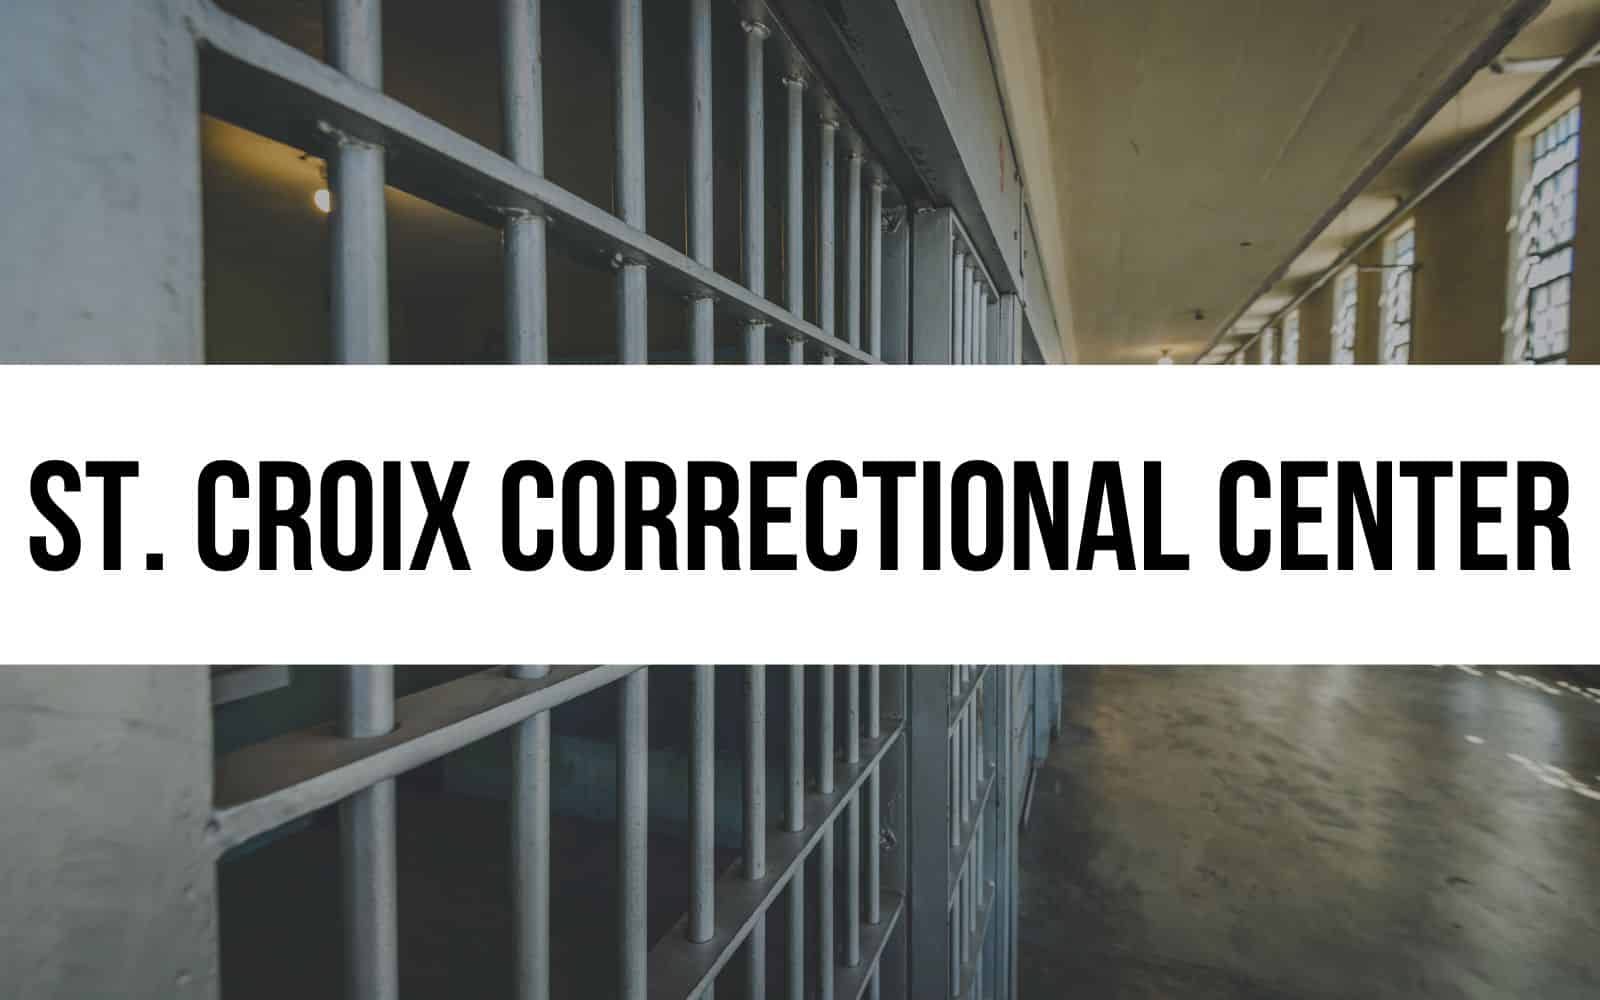 St Croix Correctional Center: Programs and Services